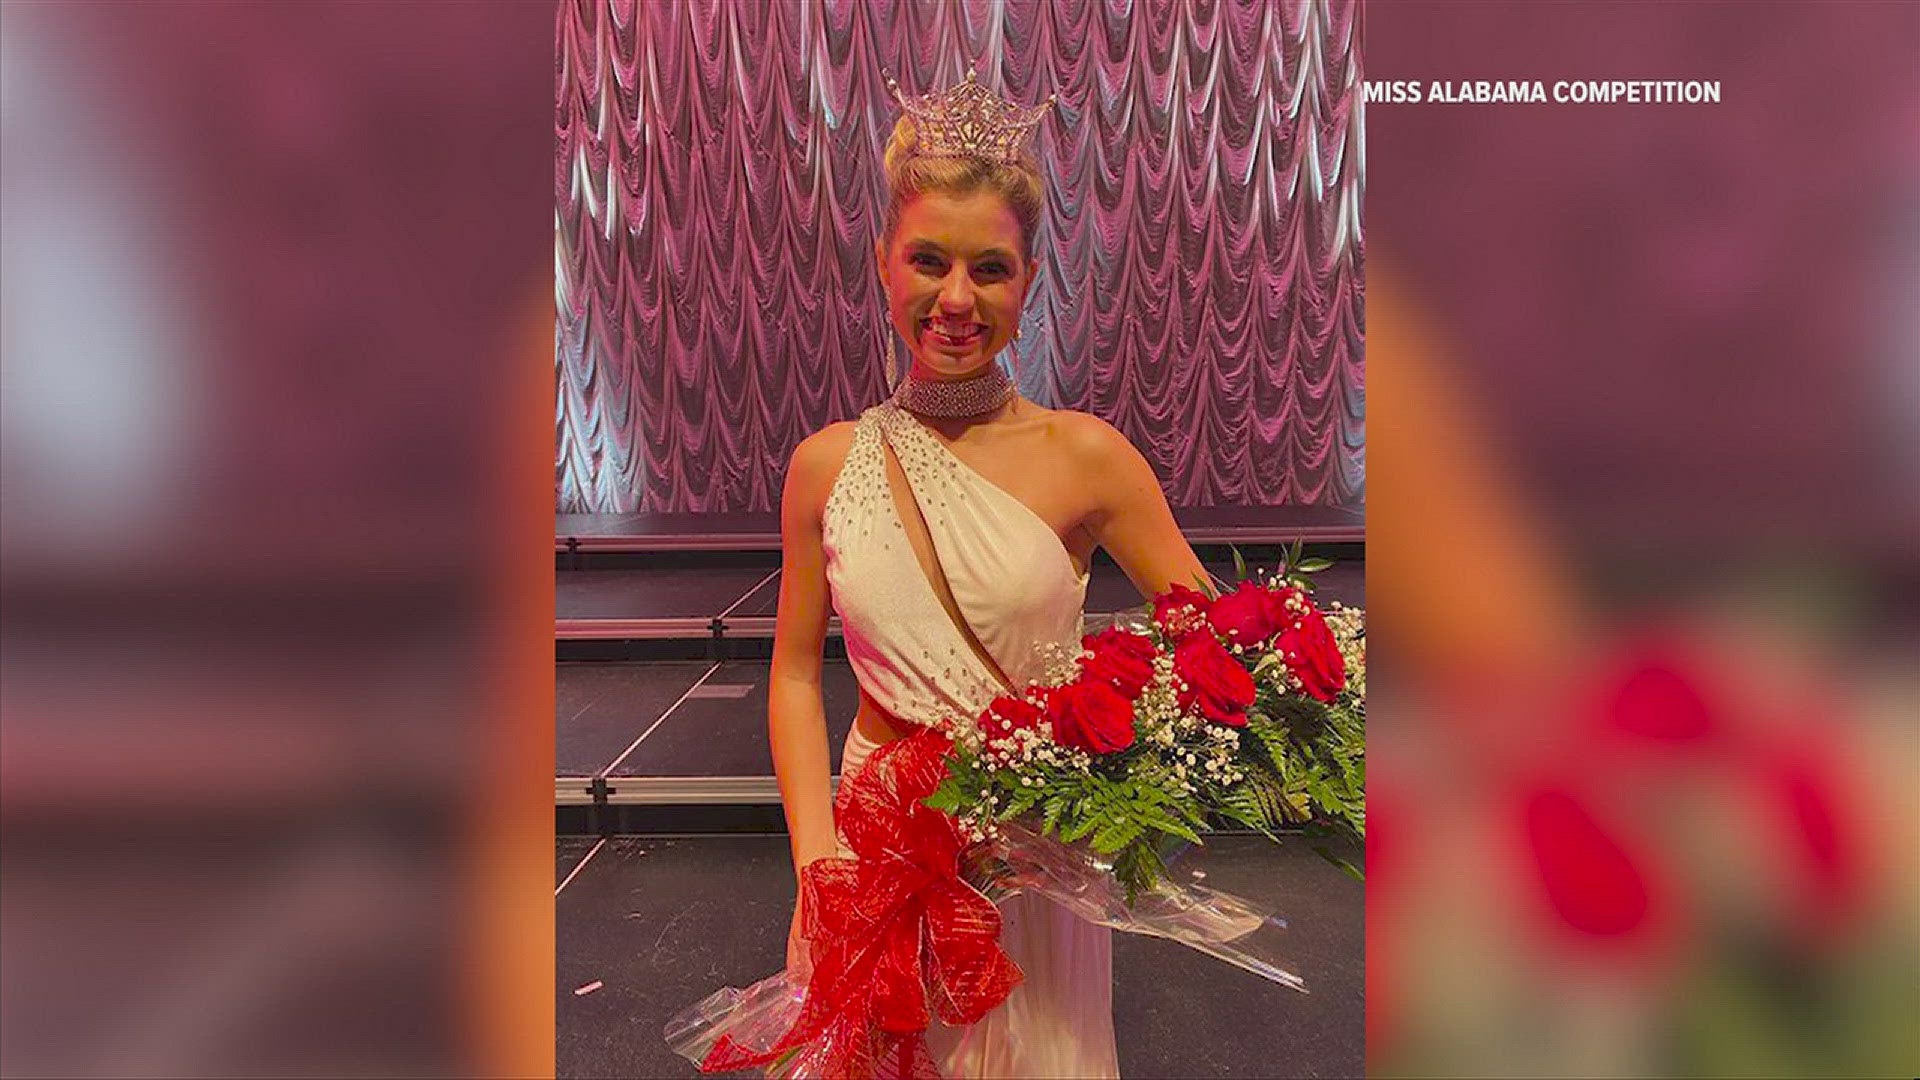 Miss Hoover, aka Abbie Stockard, was crowned Miss Alabama this week and will advance to the Miss America pageant in January.